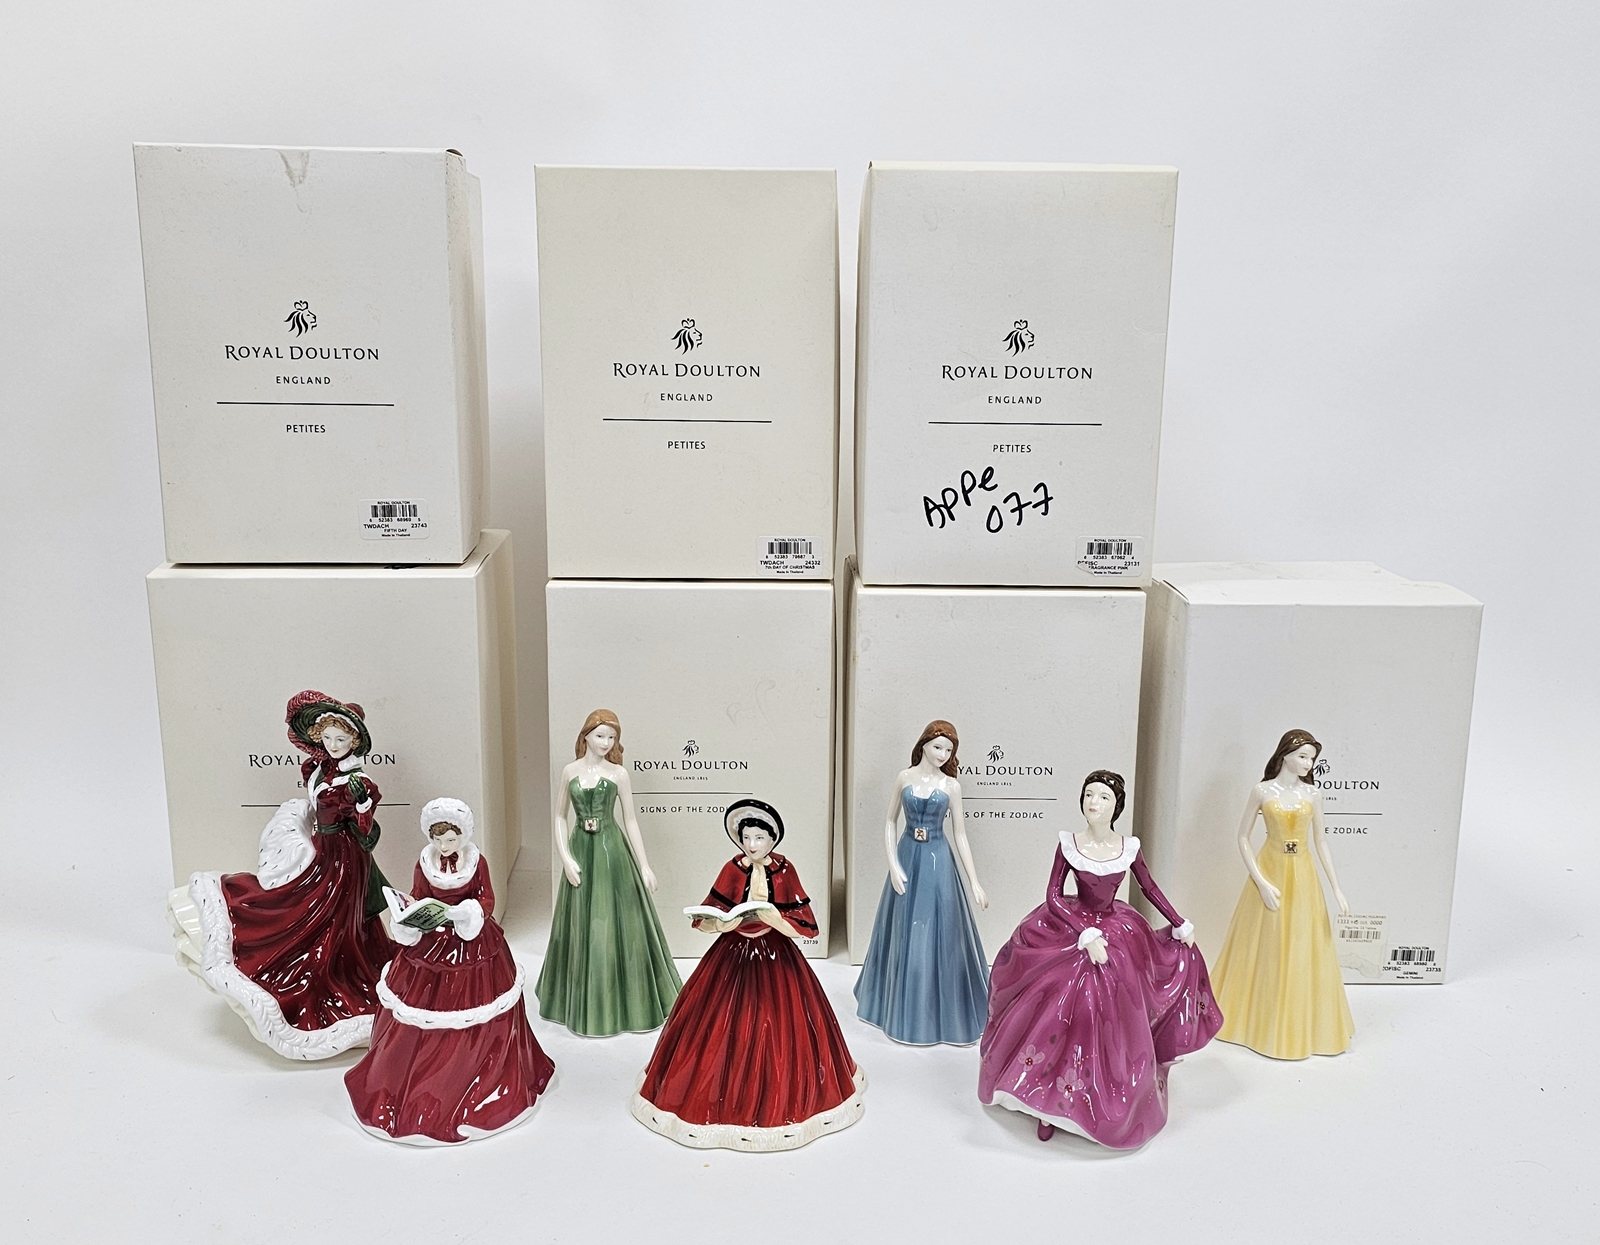 Seven Royal Doulton bone china figures of ladies, in original boxes, including Petits Signs of the